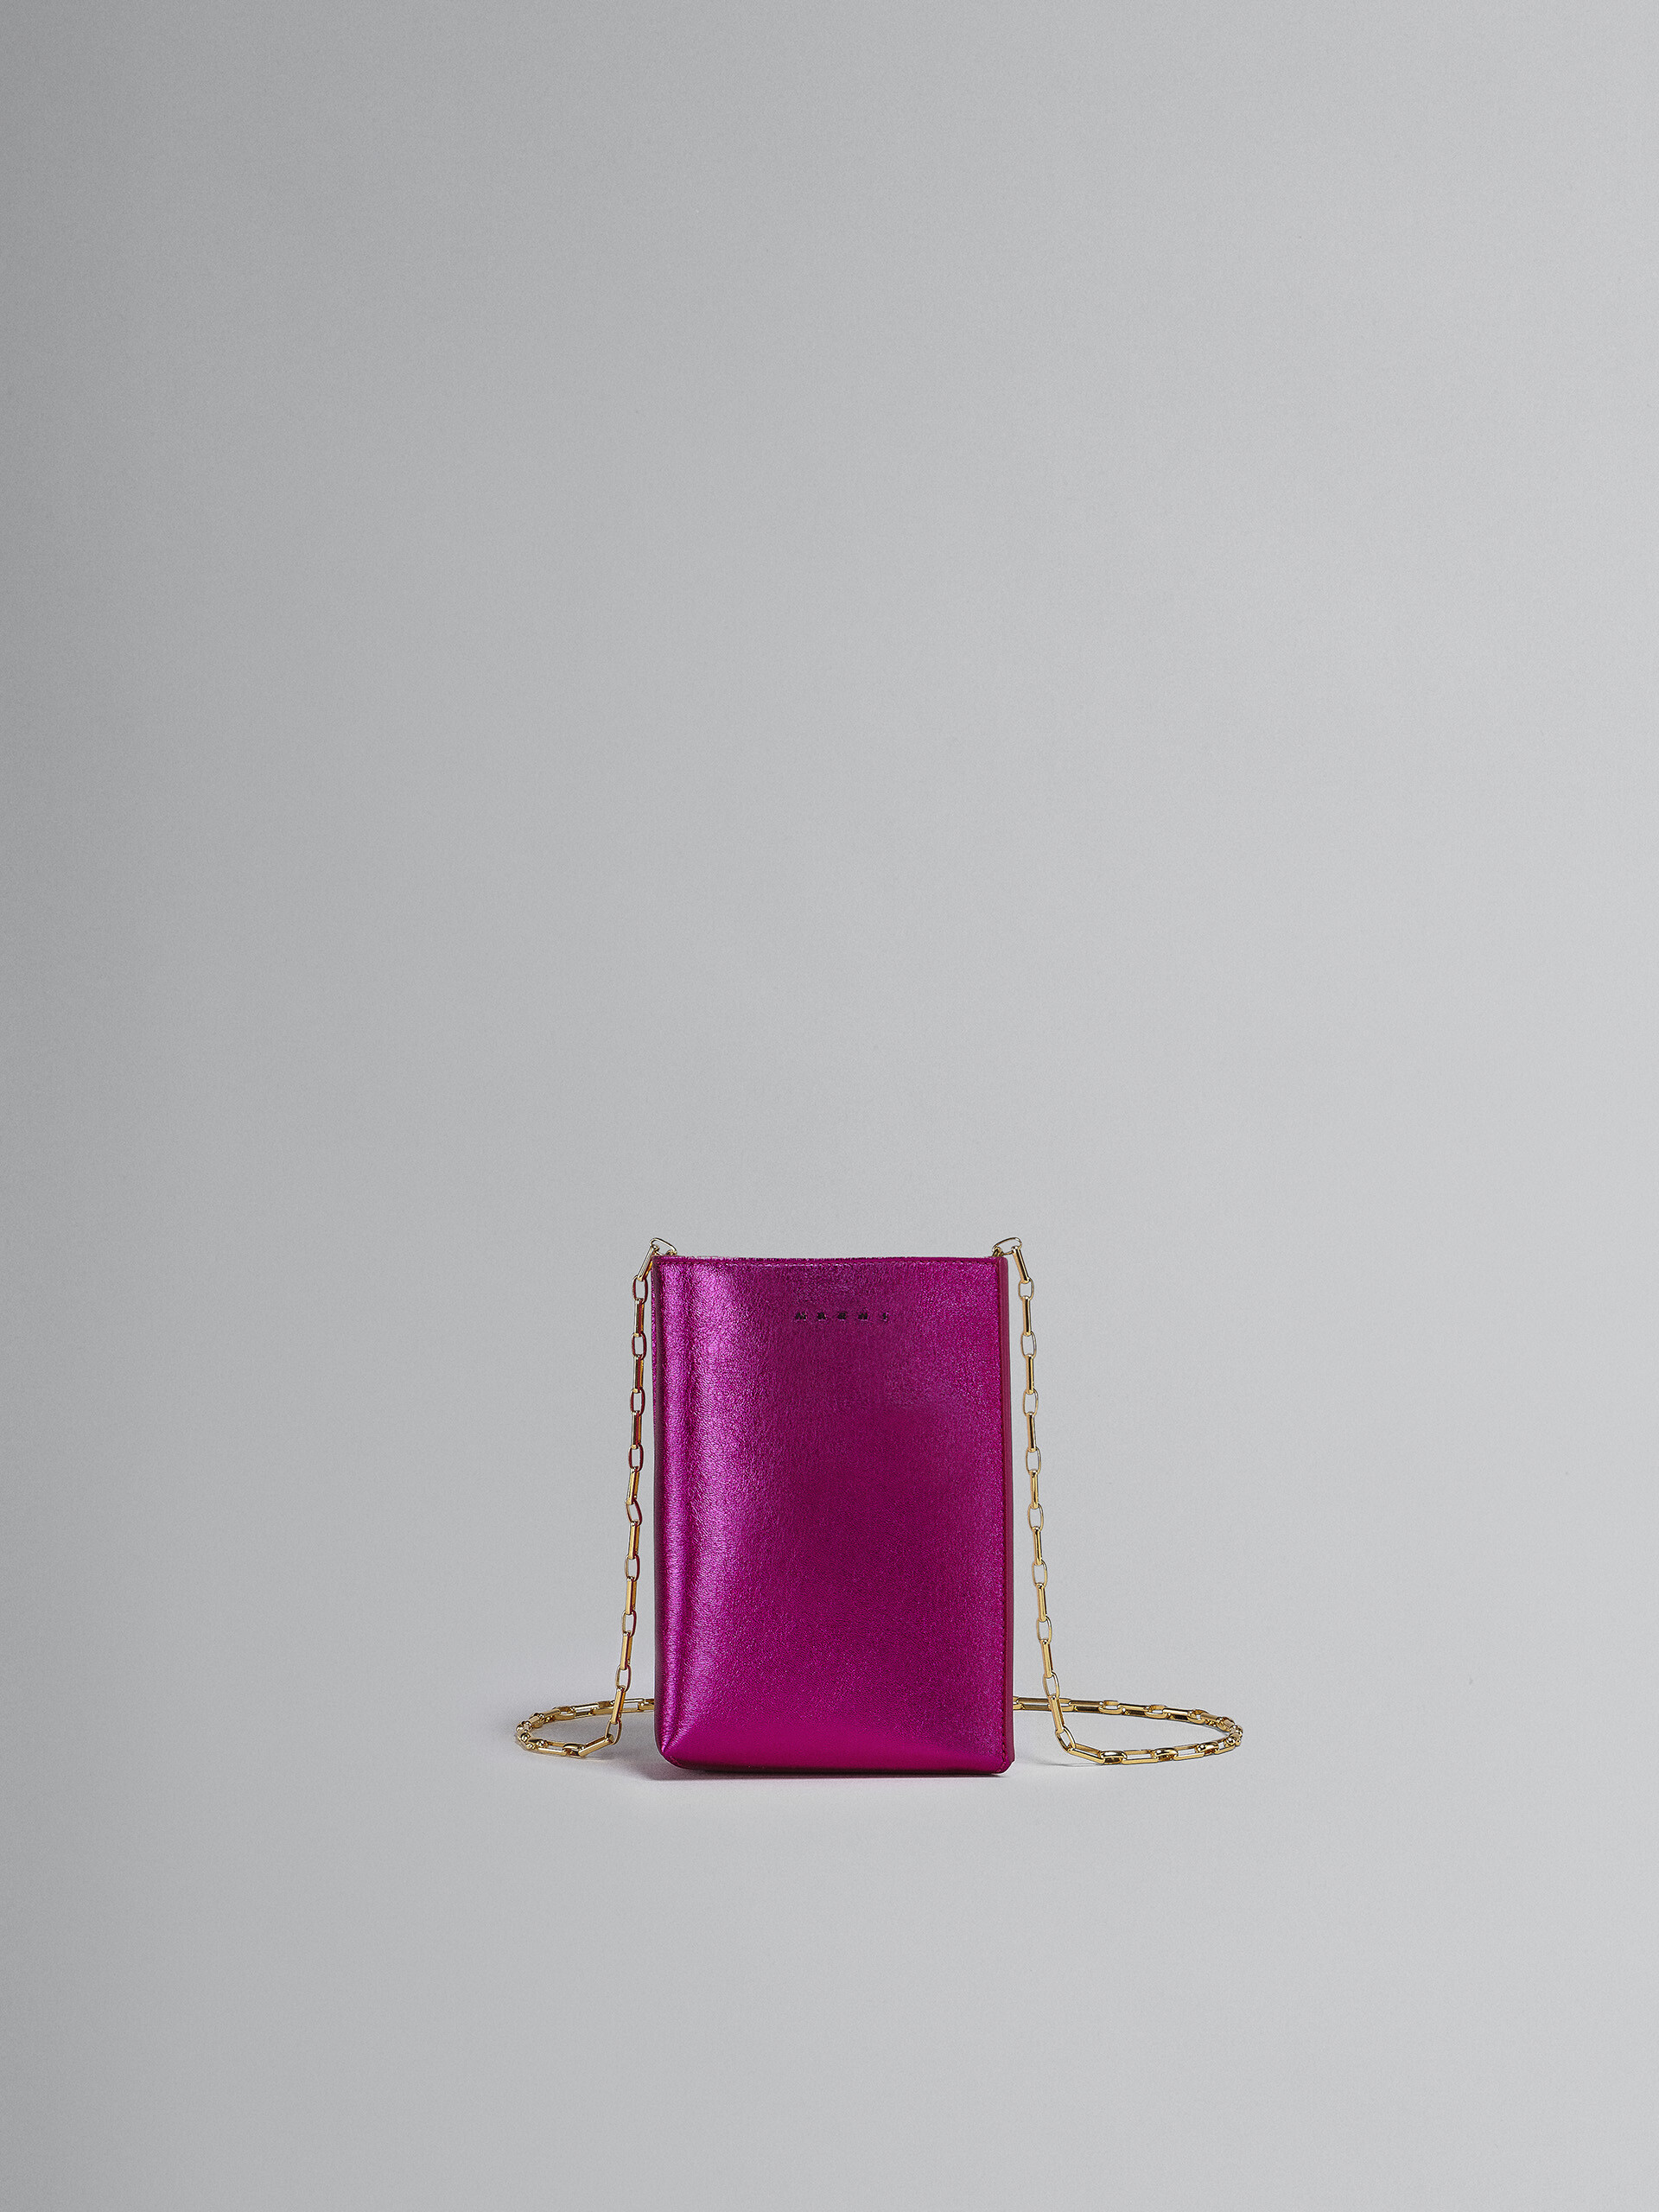 MUSEO SOFT nano bag in fuchsia and pink metallic leather - Shoulder Bags - Image 1